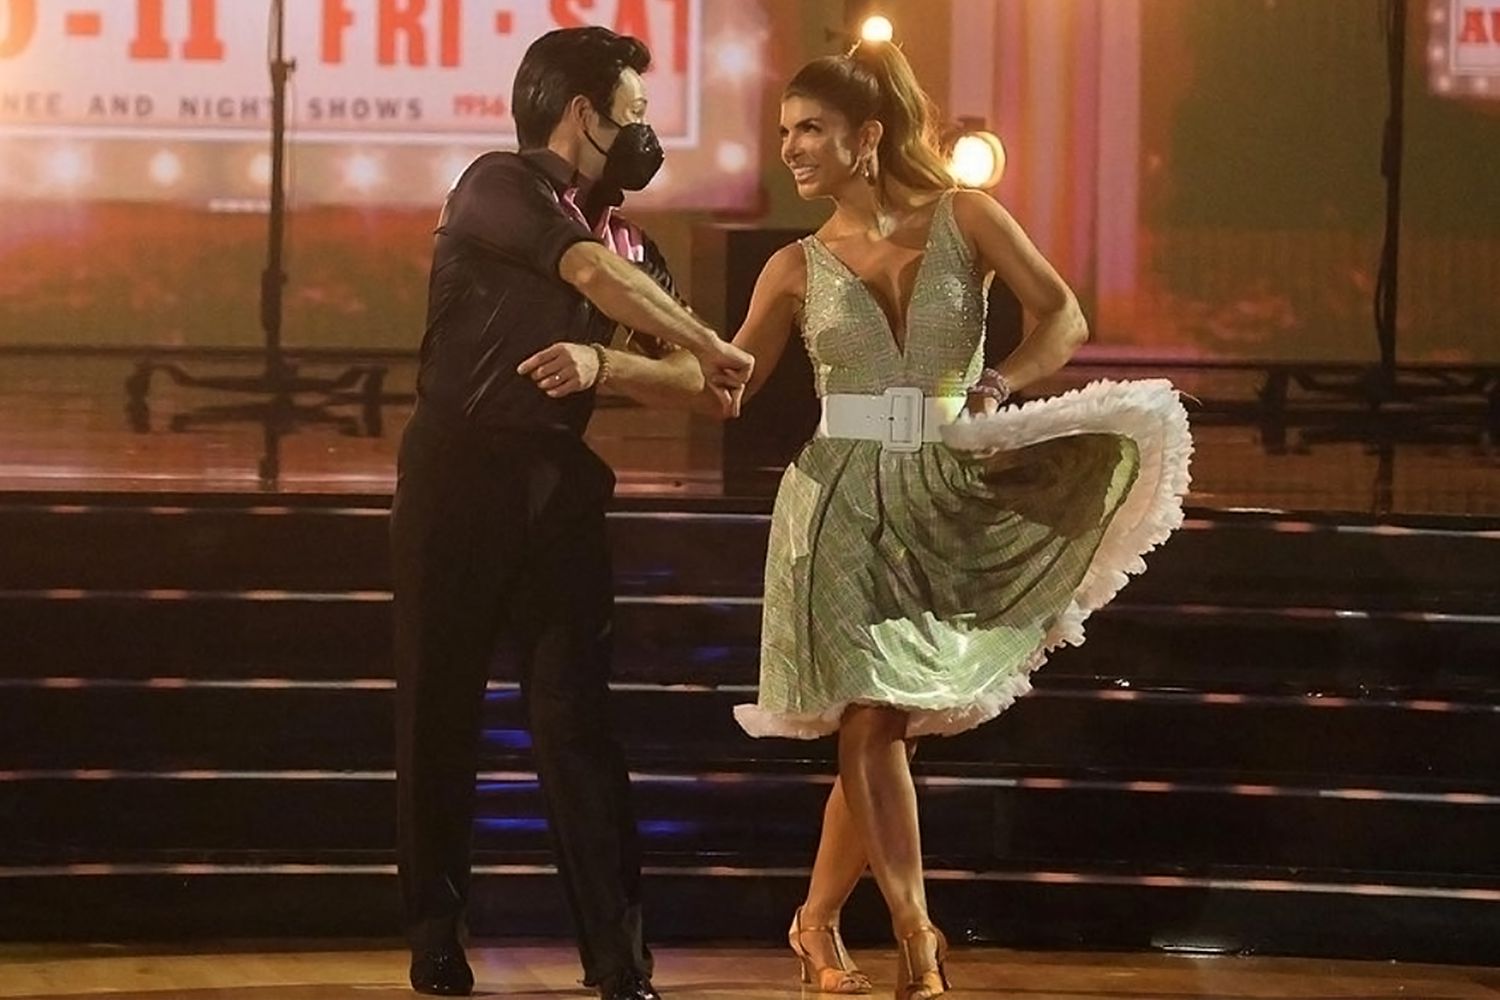 'Dancing With the Stars' elimination comes down to tie-breaking vote